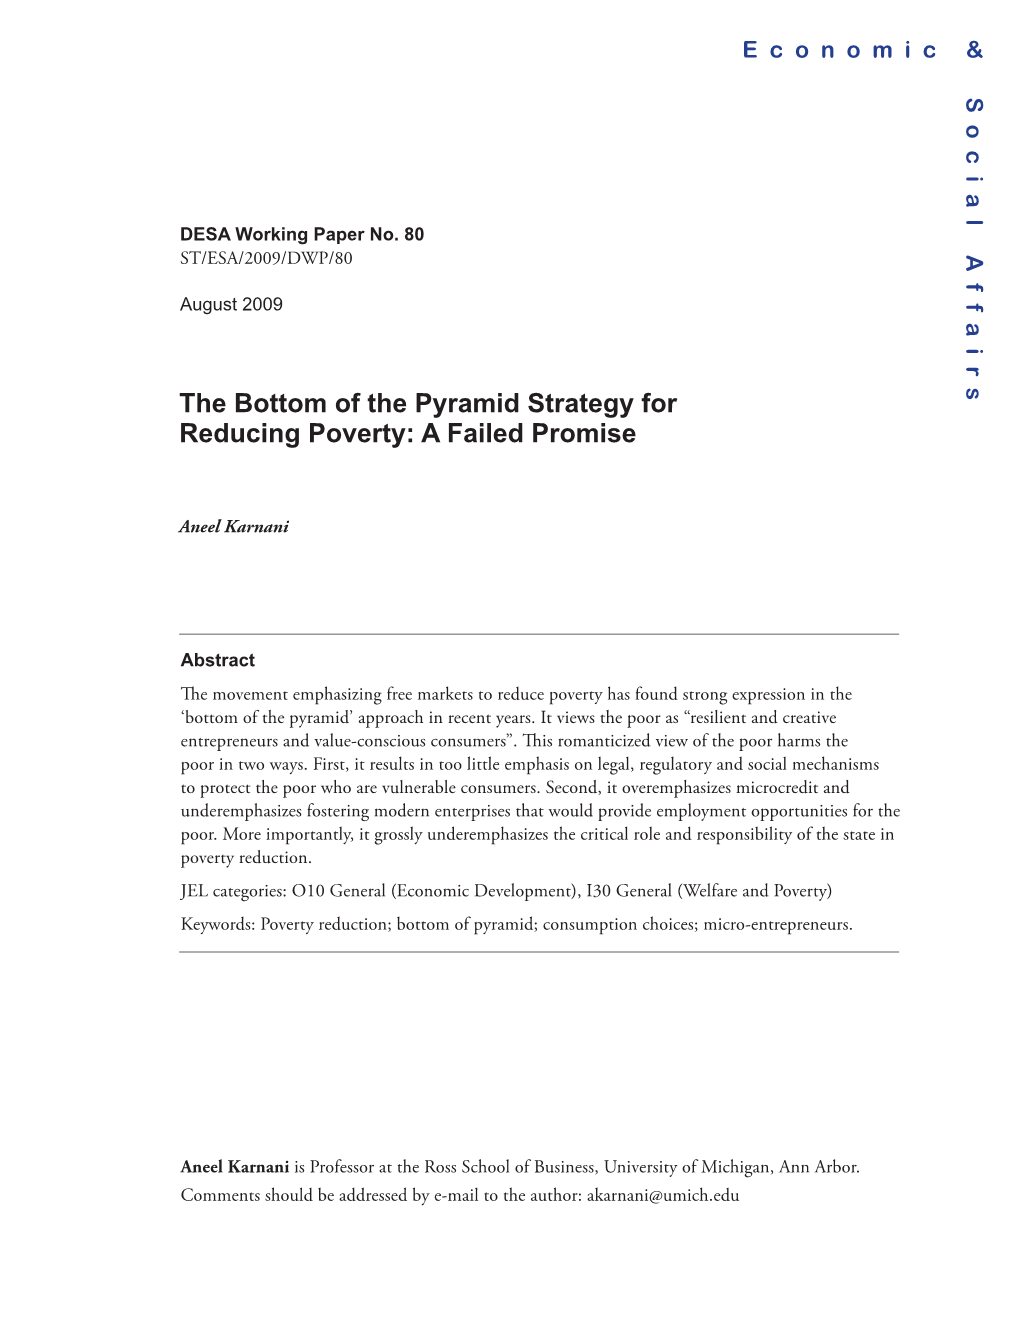 The Bottom of the Pyramid Strategy for Reducing Poverty: a Failed Promise